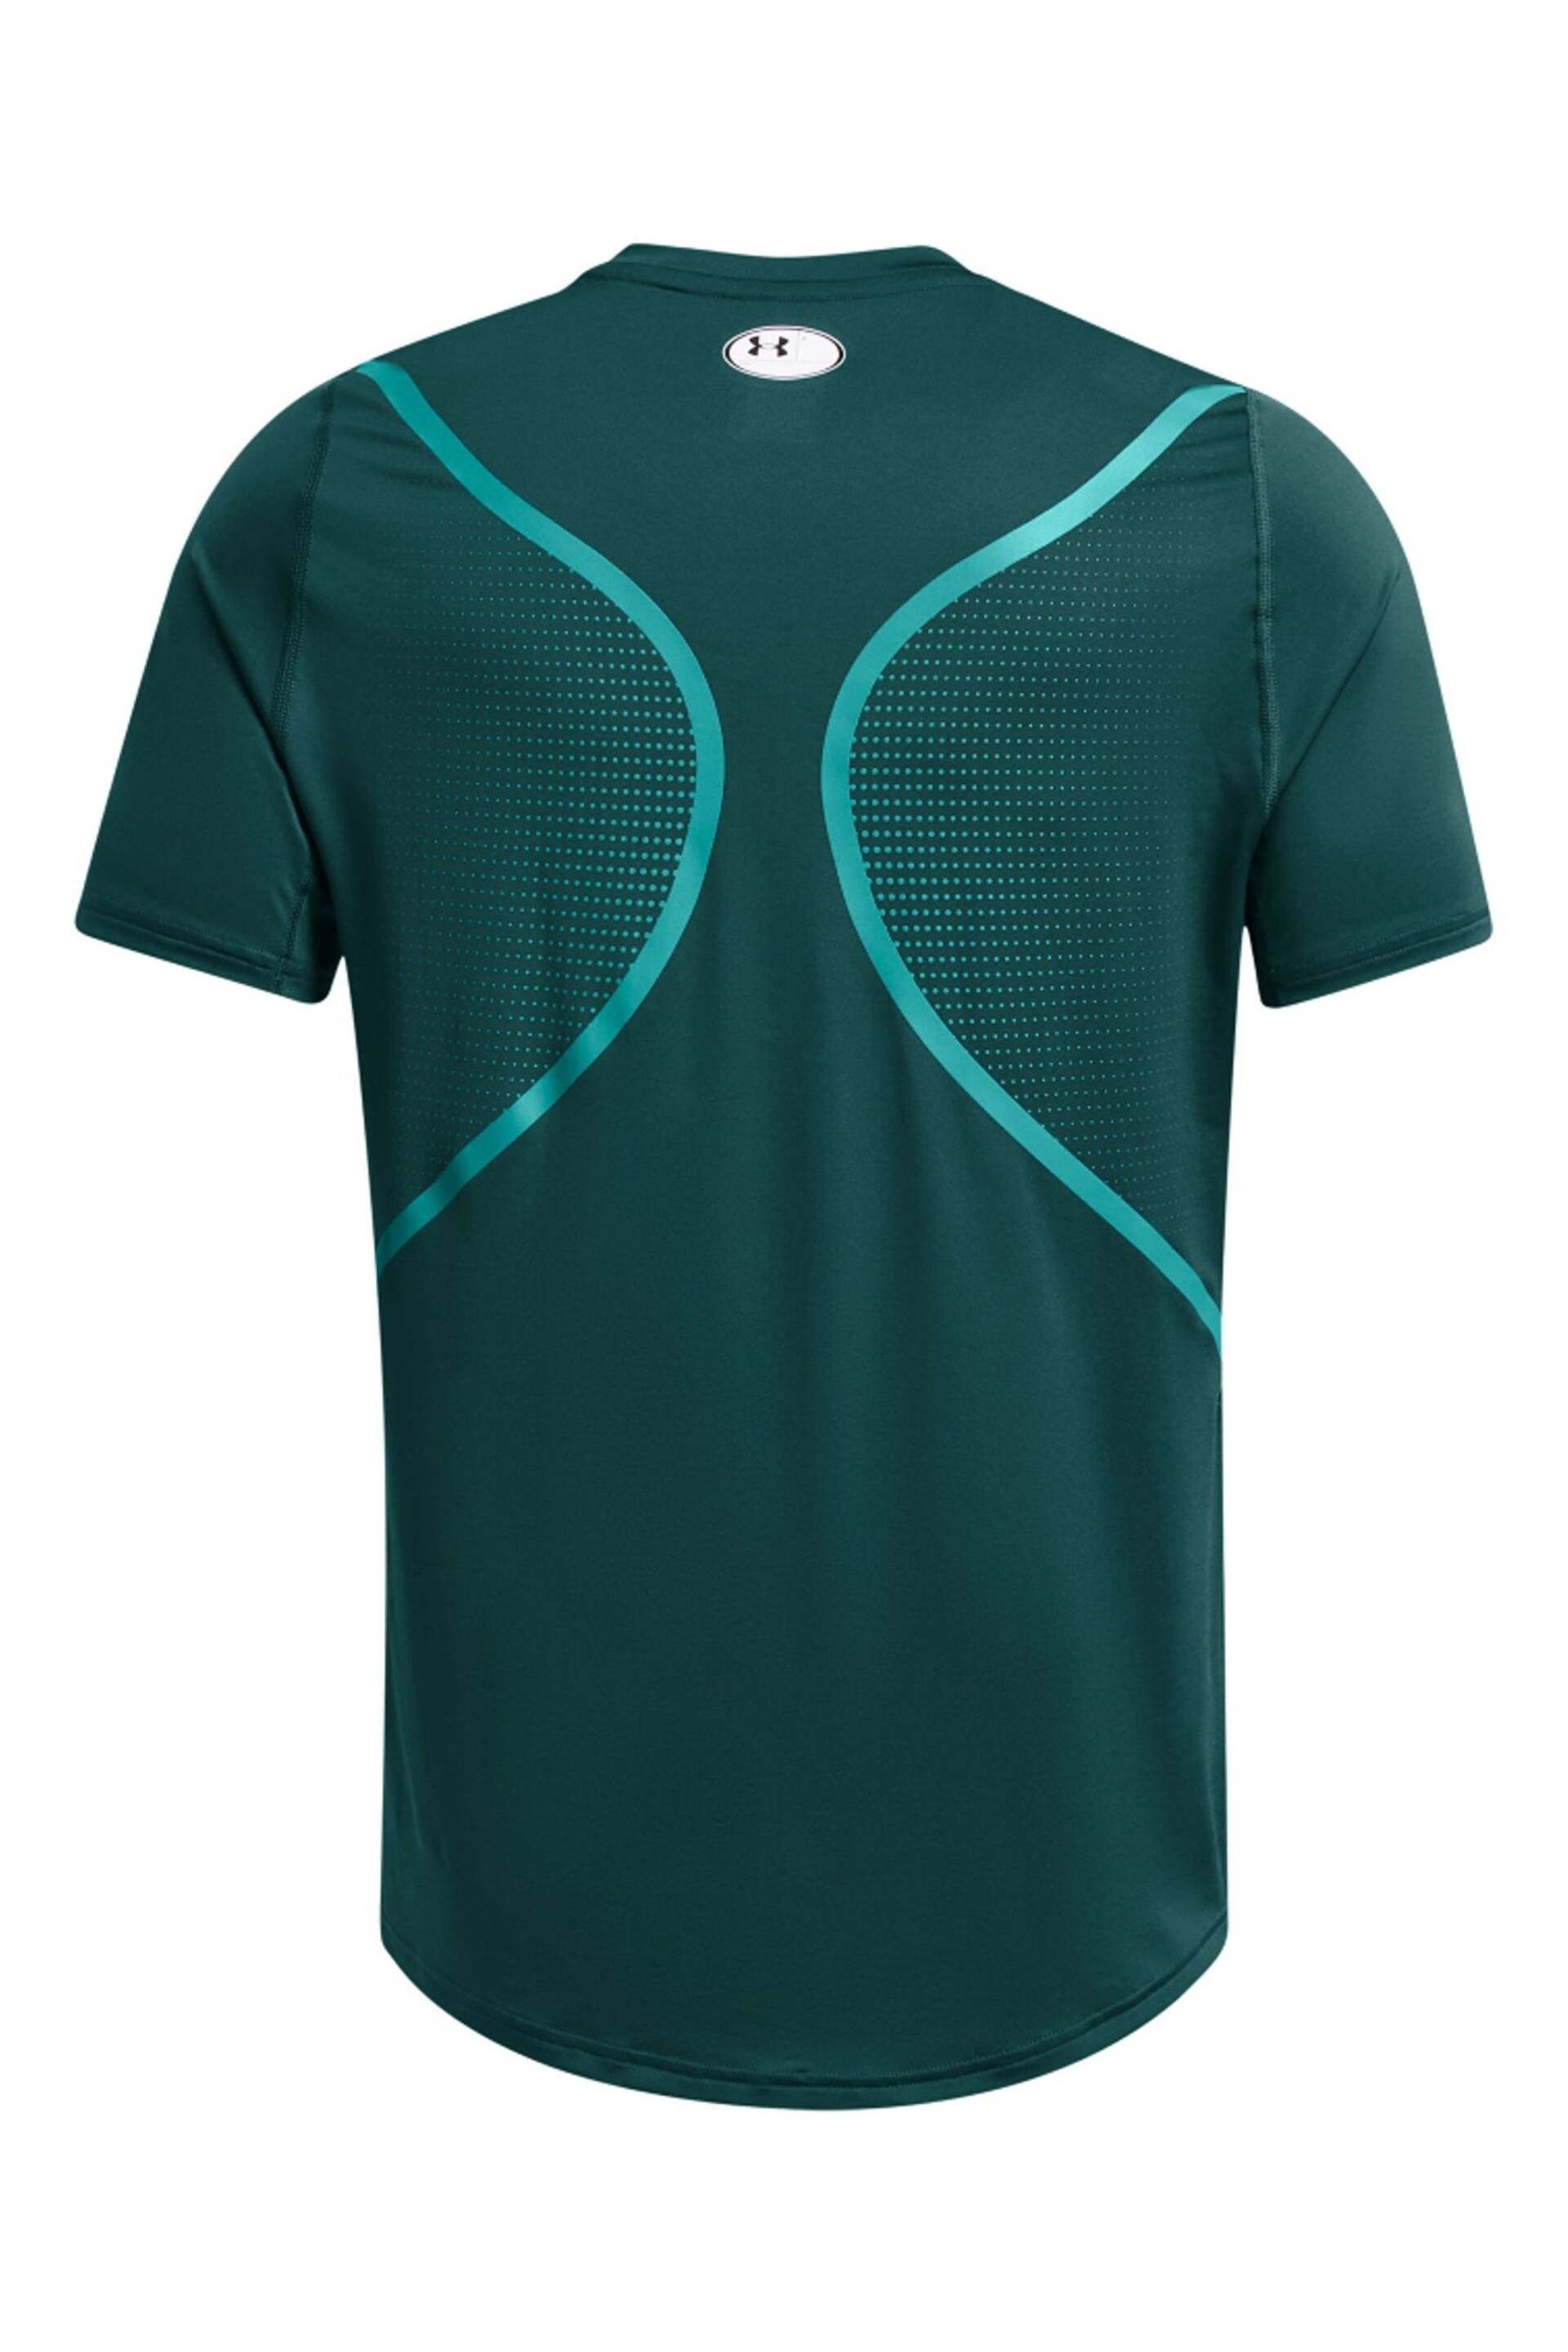 Under Armour Teal Blue HeatGear Fitted Short Sleeve T-Shirt - Image 4 of 4